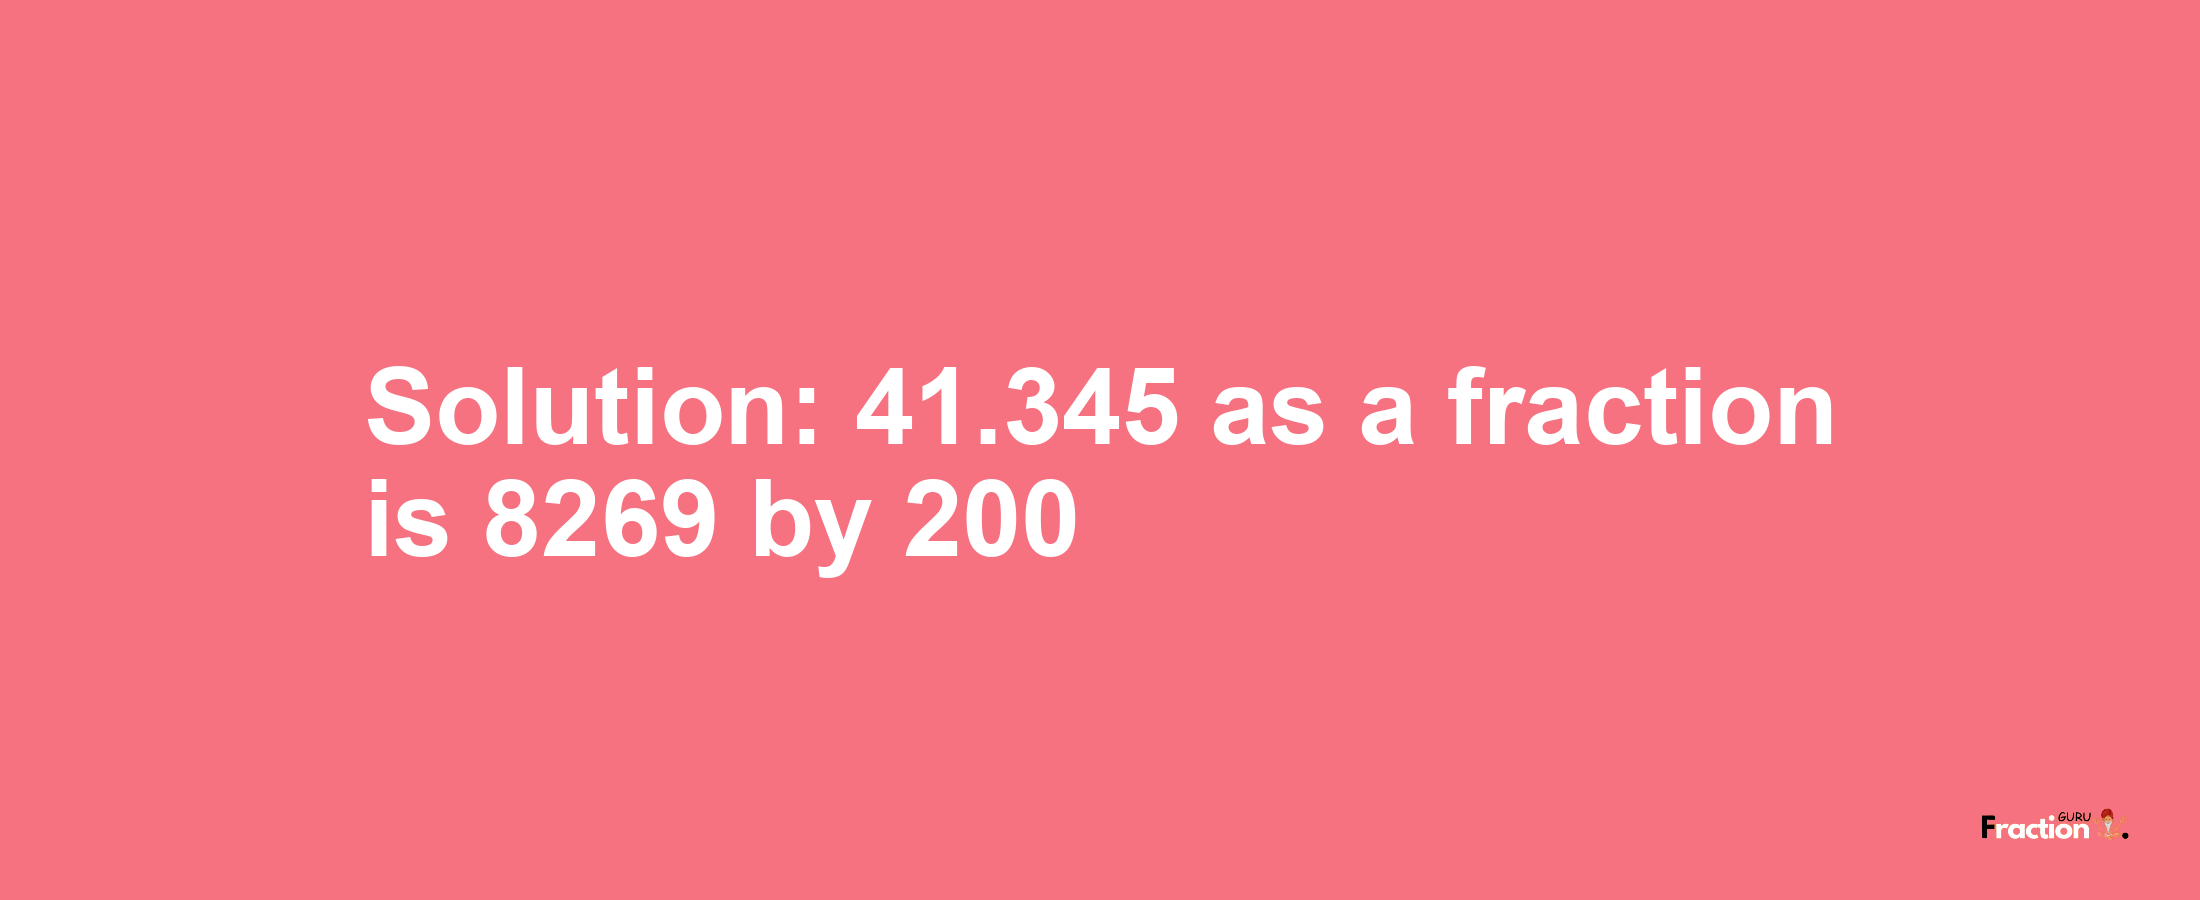 Solution:41.345 as a fraction is 8269/200